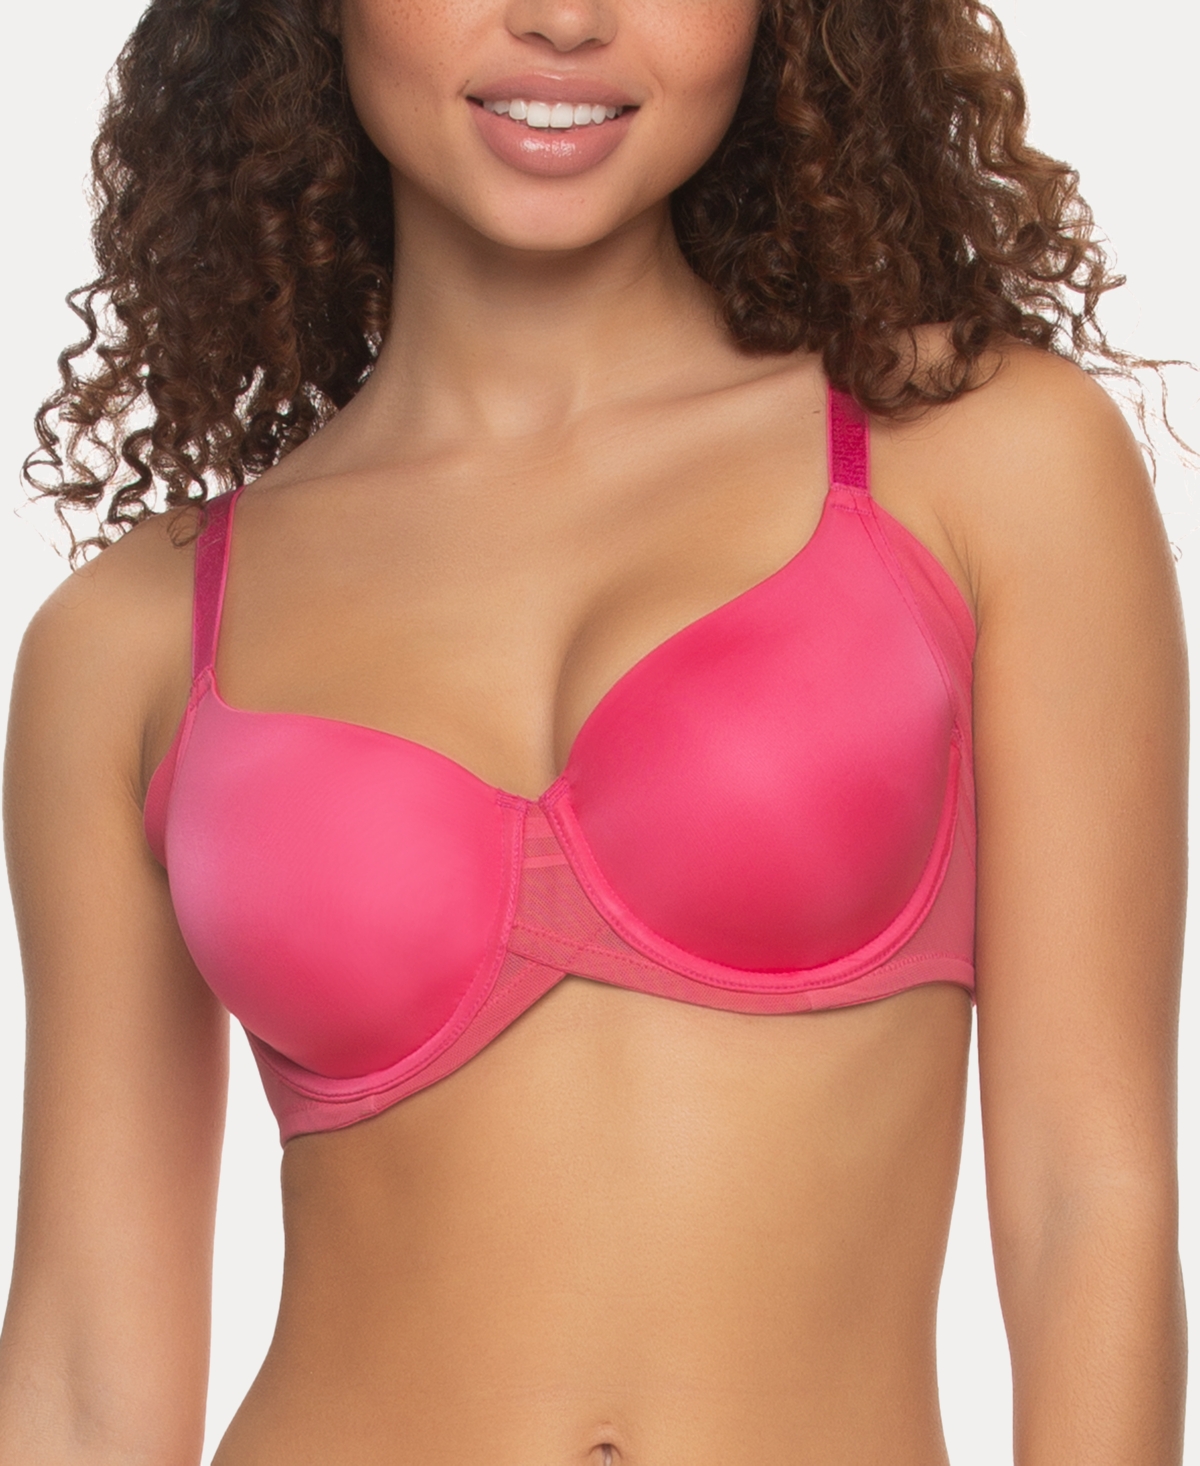 Felina  Ethereal Sheer Mesh Unlined Underwire (Dune, 32C) at